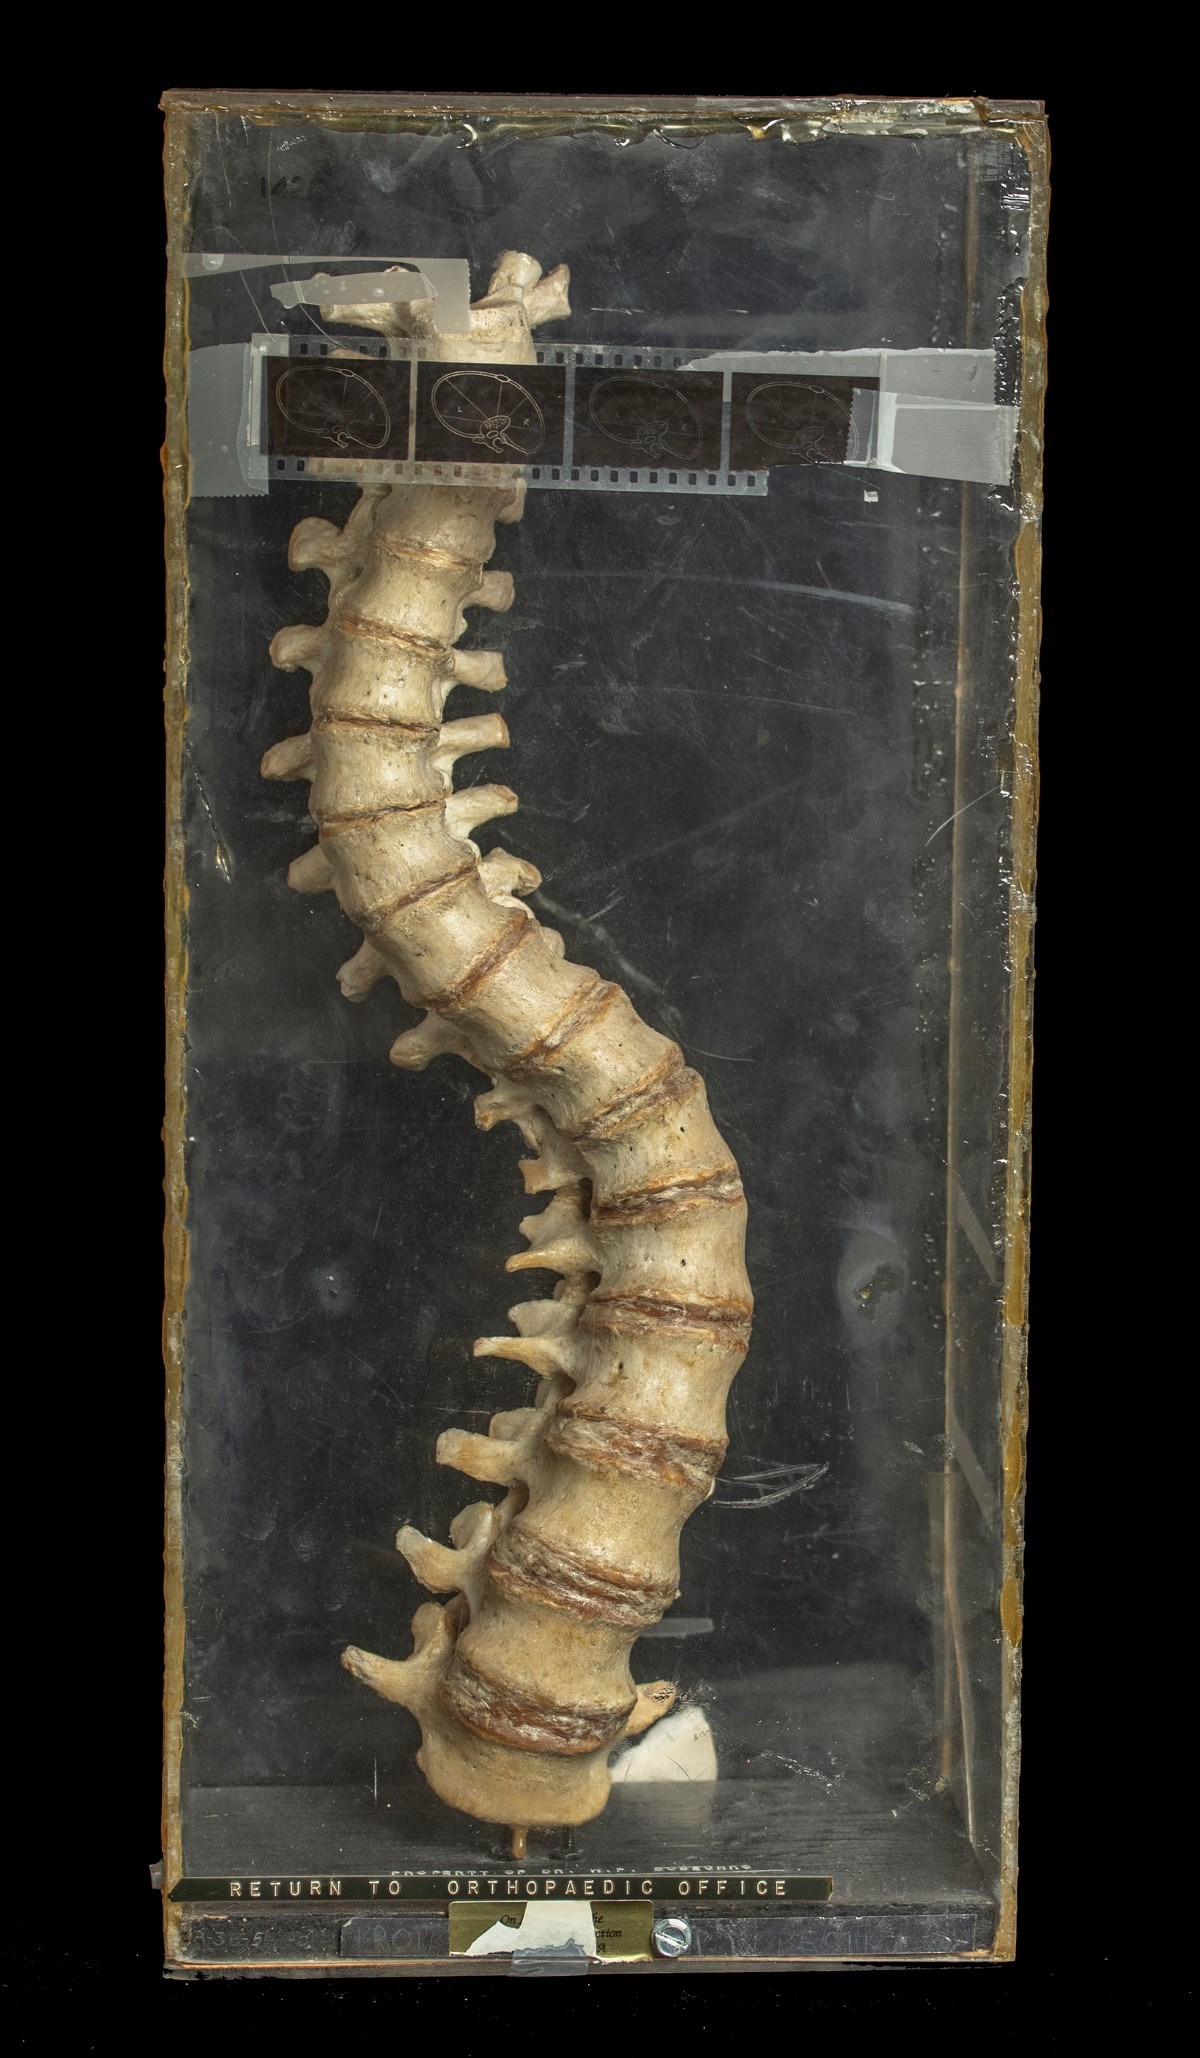 A spine curved in the shape of an S. The spine is displayed upright inside a clear display case.